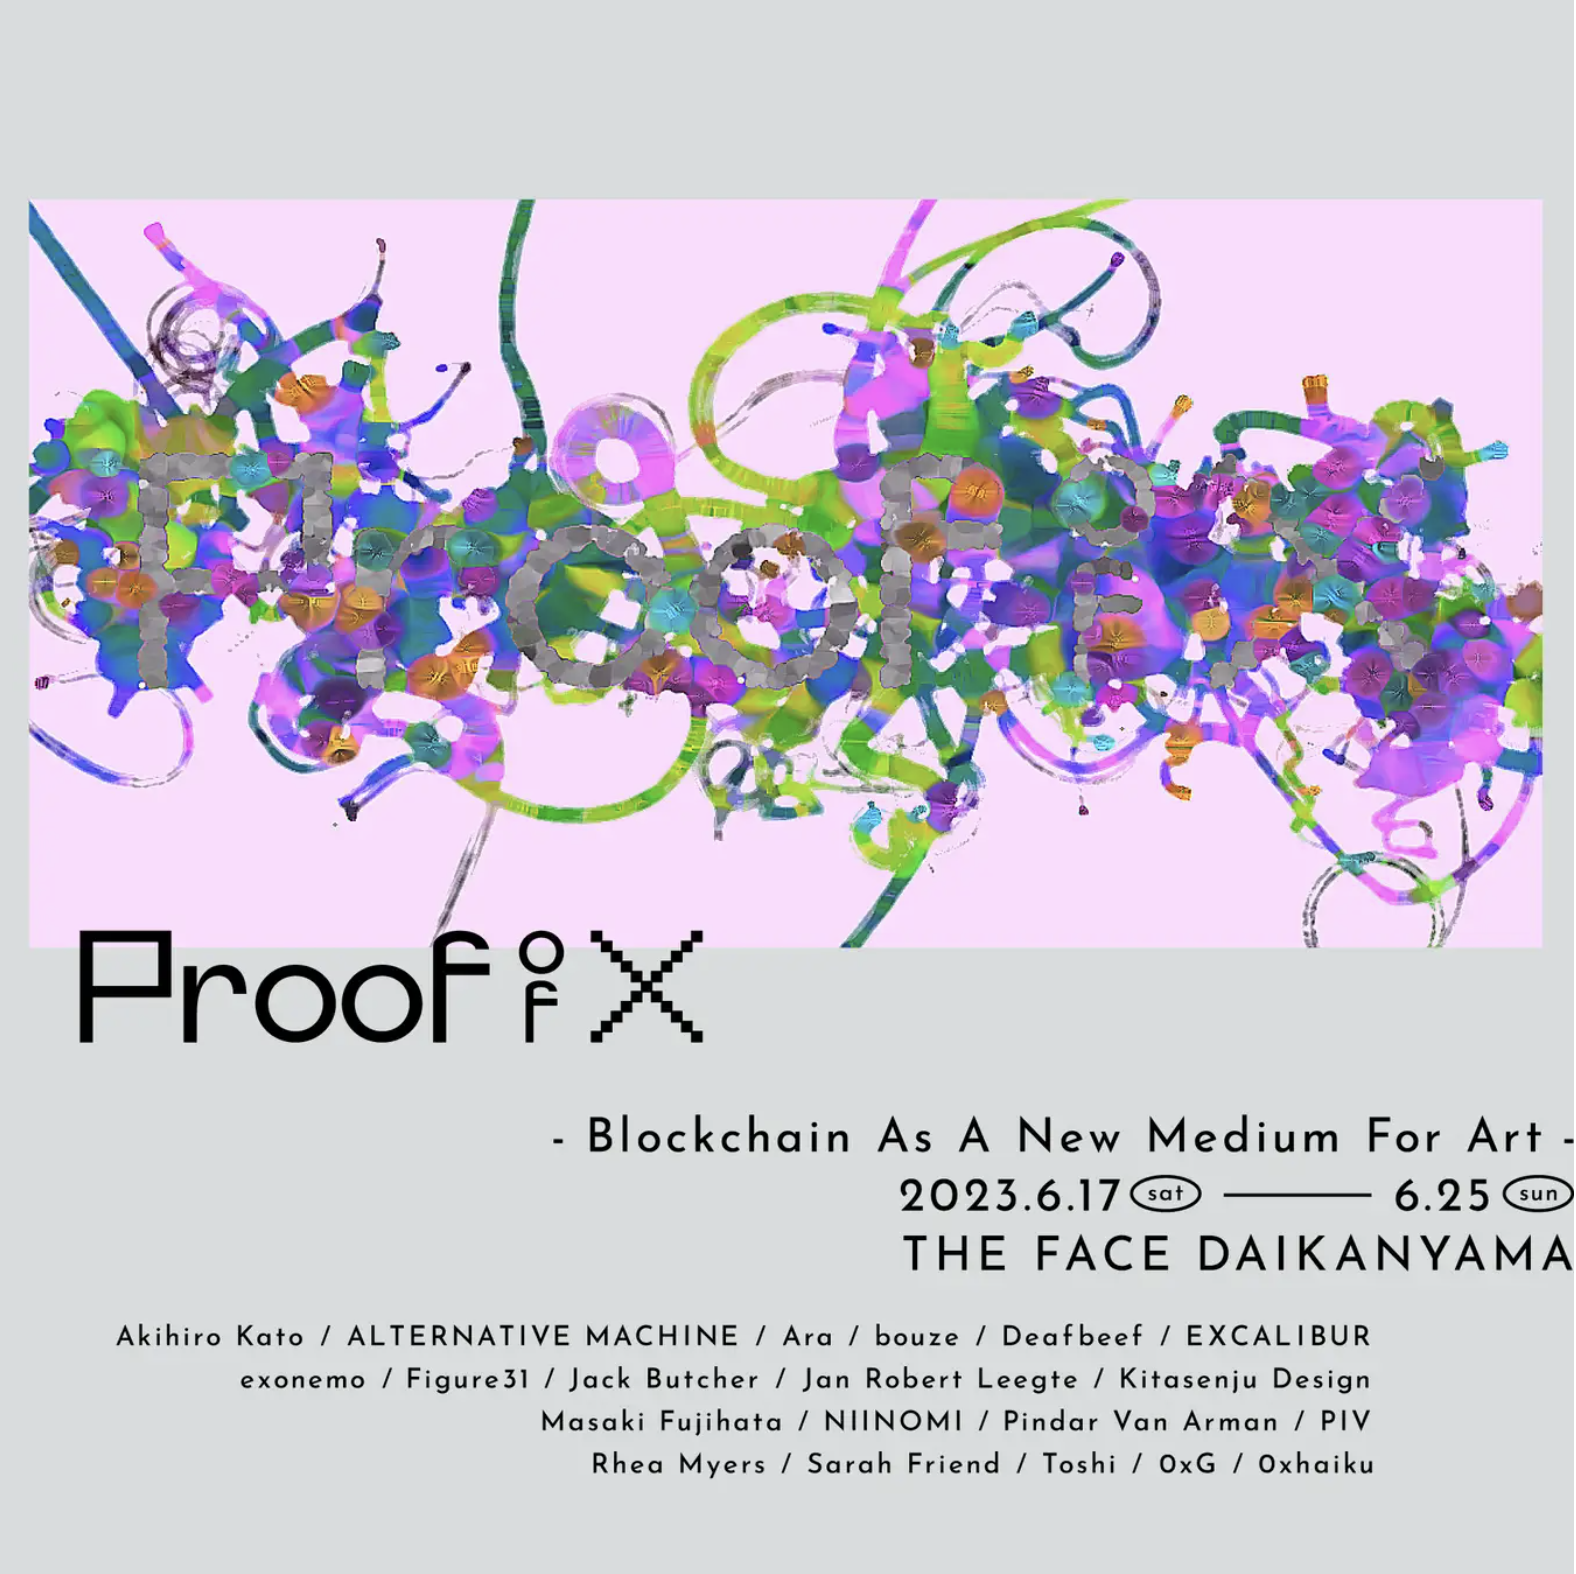 "SNOWCRASH" Exhibited at Proof Of X - Blockchain As A New Medium For Art